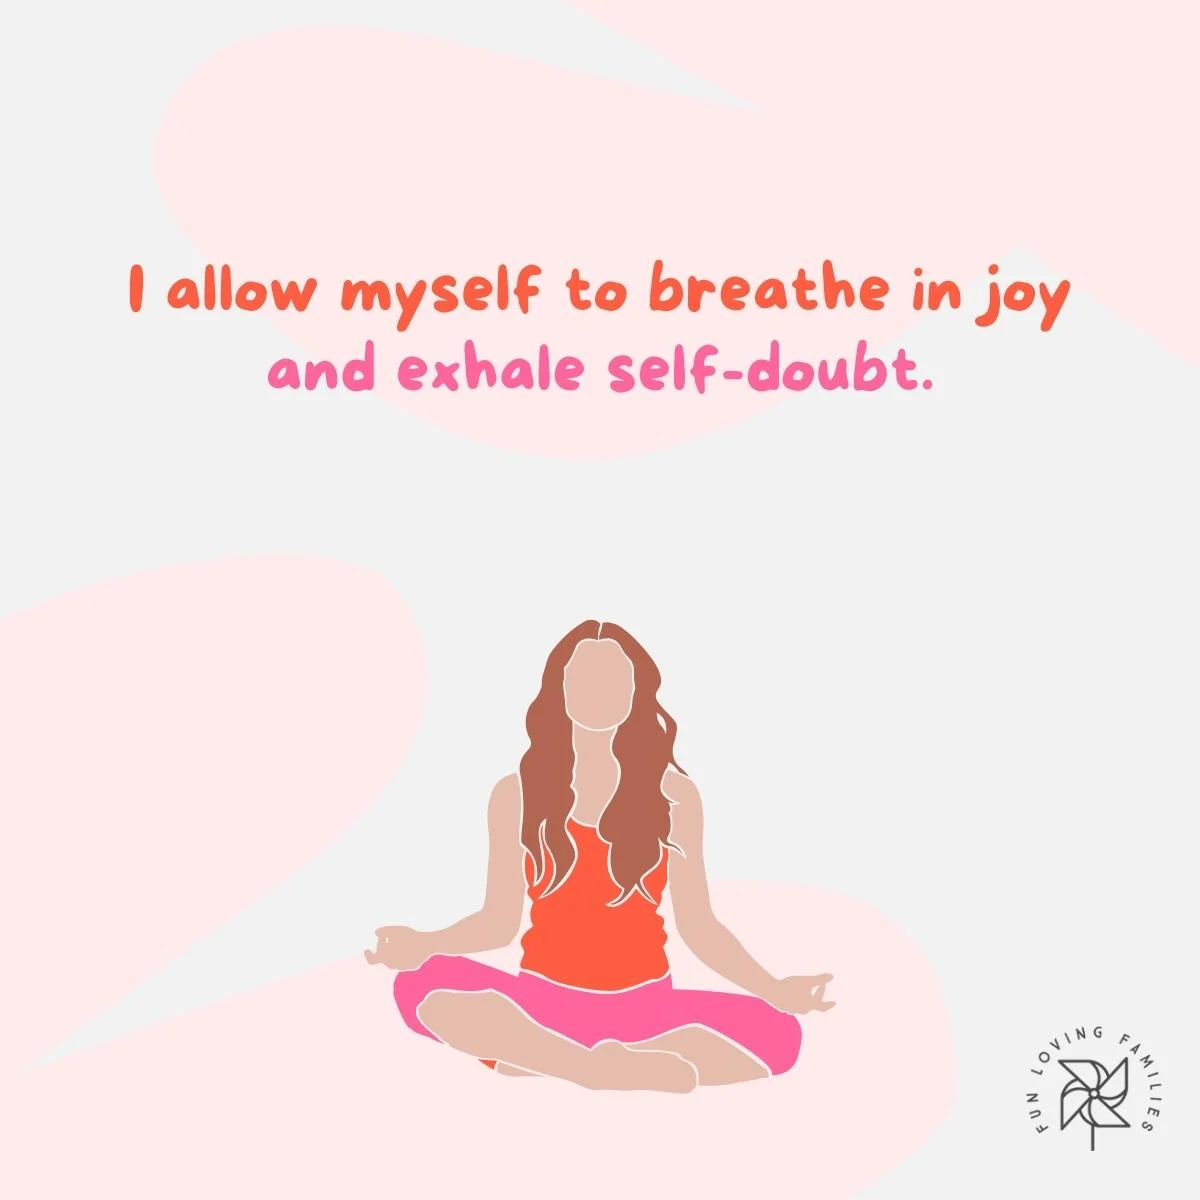 I allow myself to breathe in joy and exhale self-doubt affirmation